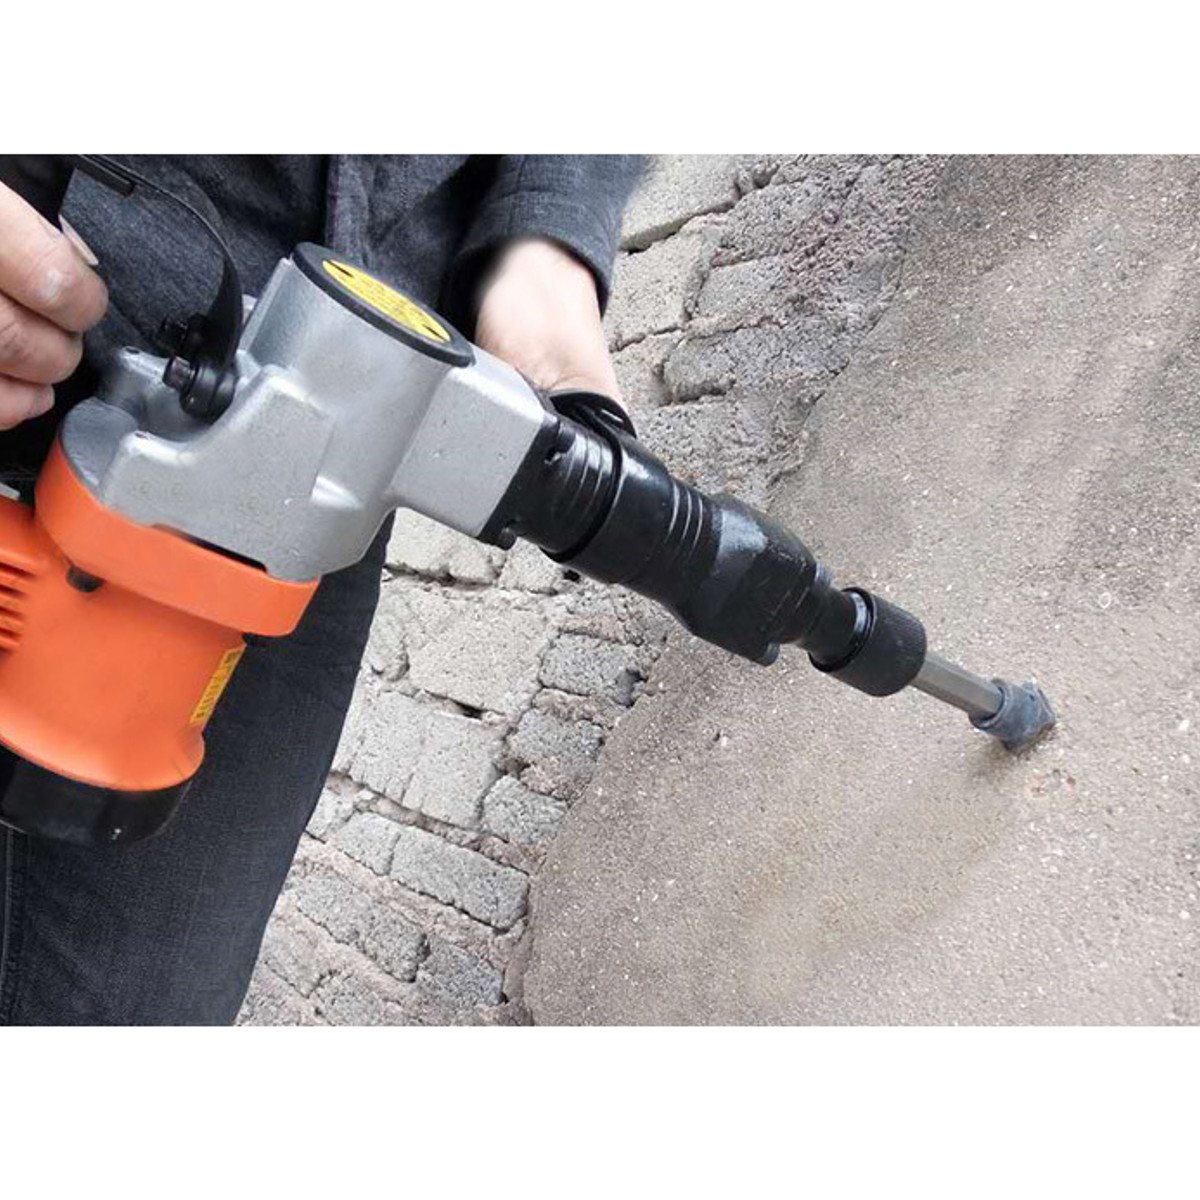 Rotary-Hammer-Electric-Hammer-Demolition-Hammer-Drill-Connecting-Rod-Handle-Accessory-1299228-7